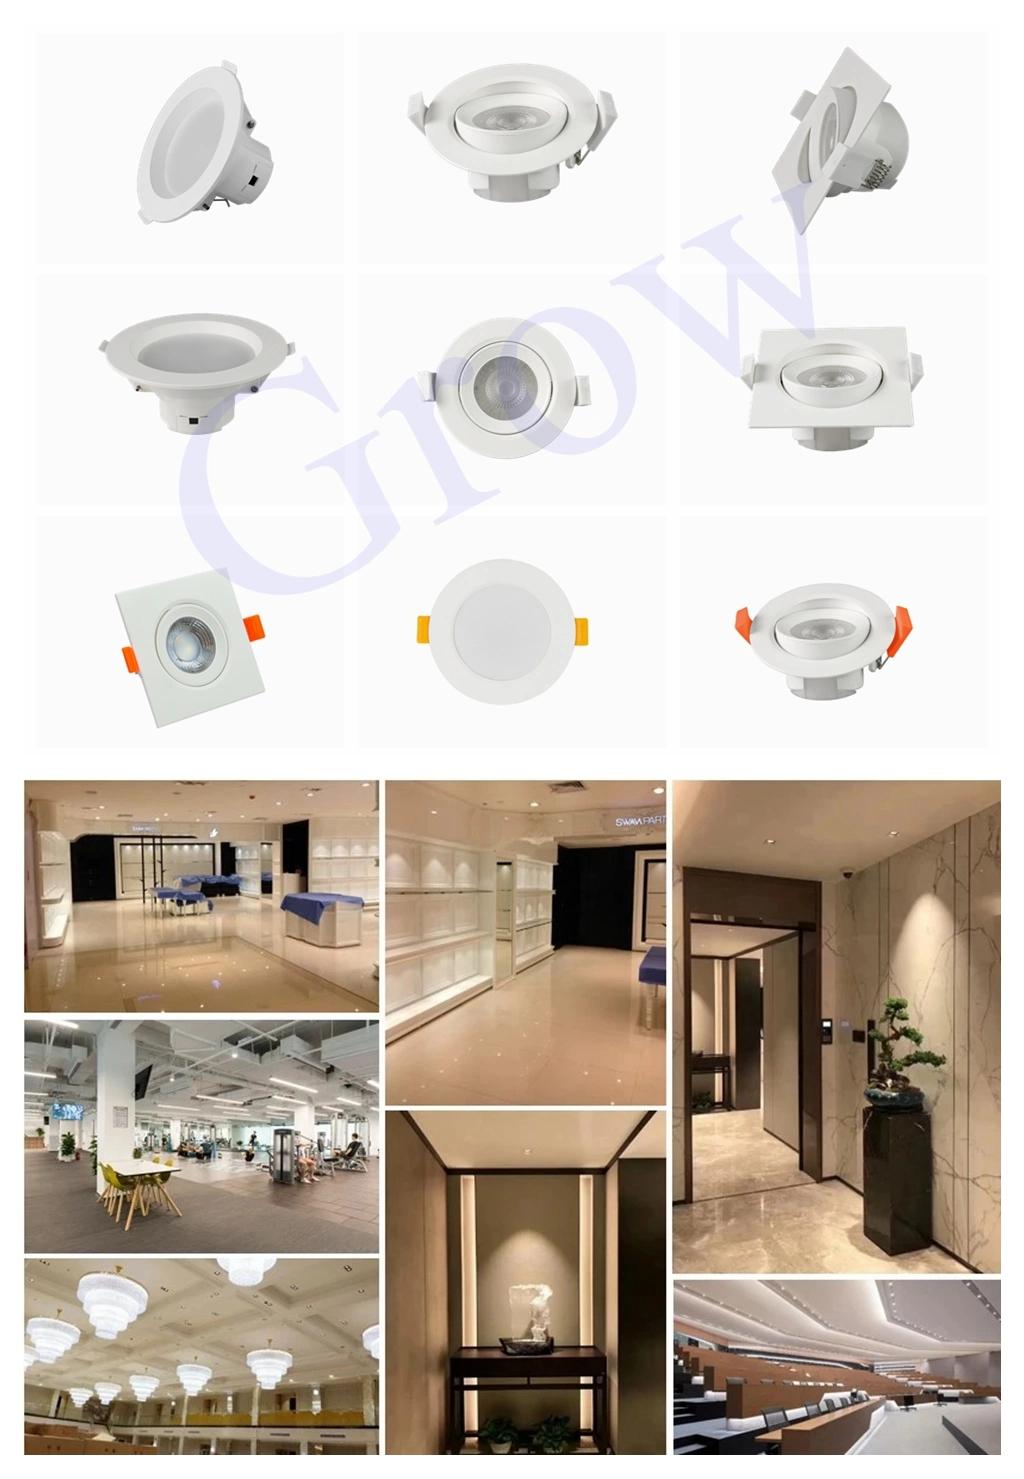 7-24W Adjustable LED Downlight Panel Ceiling Lamp Chinese Factory Produce 2-8 Inch LED Downlight Installation